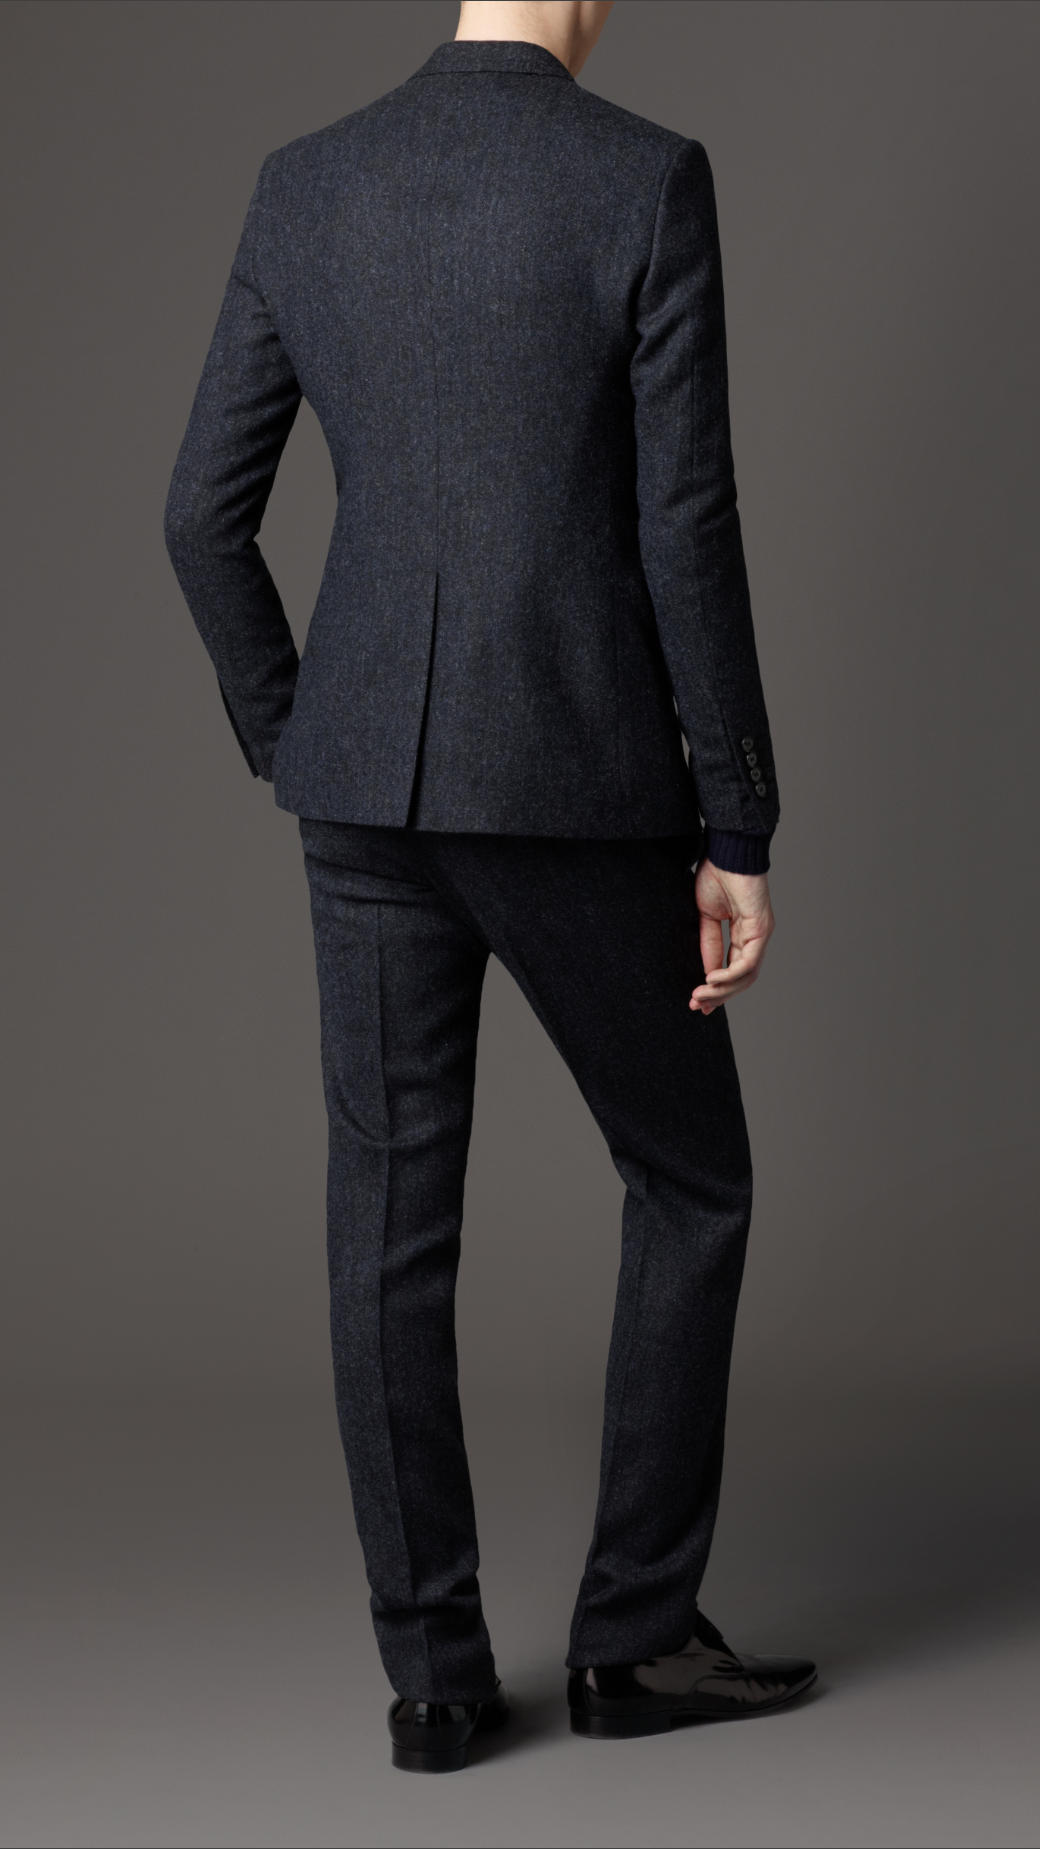 What is the problem? (suit back) | Styleforum